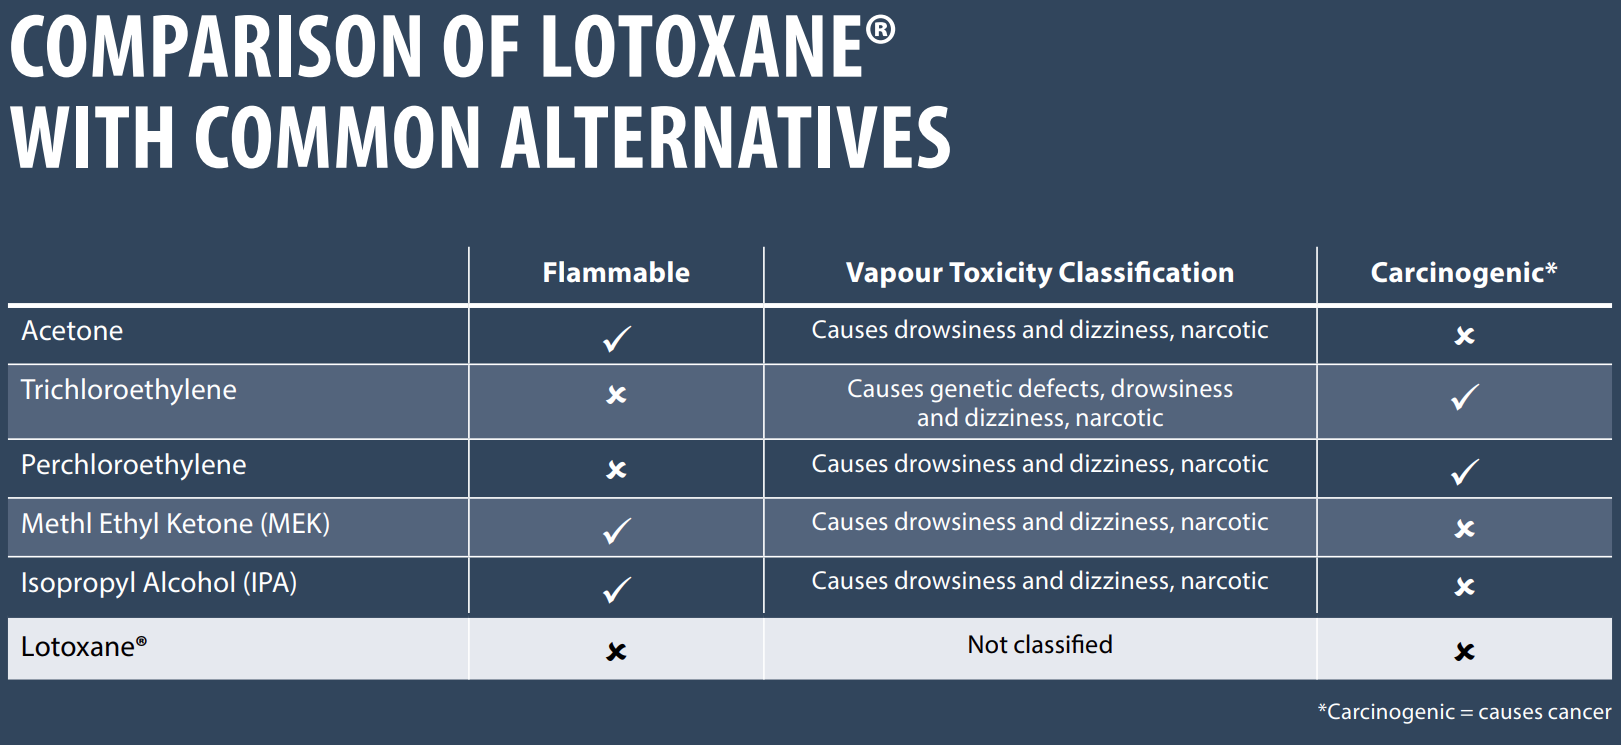 comparison table for Lotoxane products and common alternatives